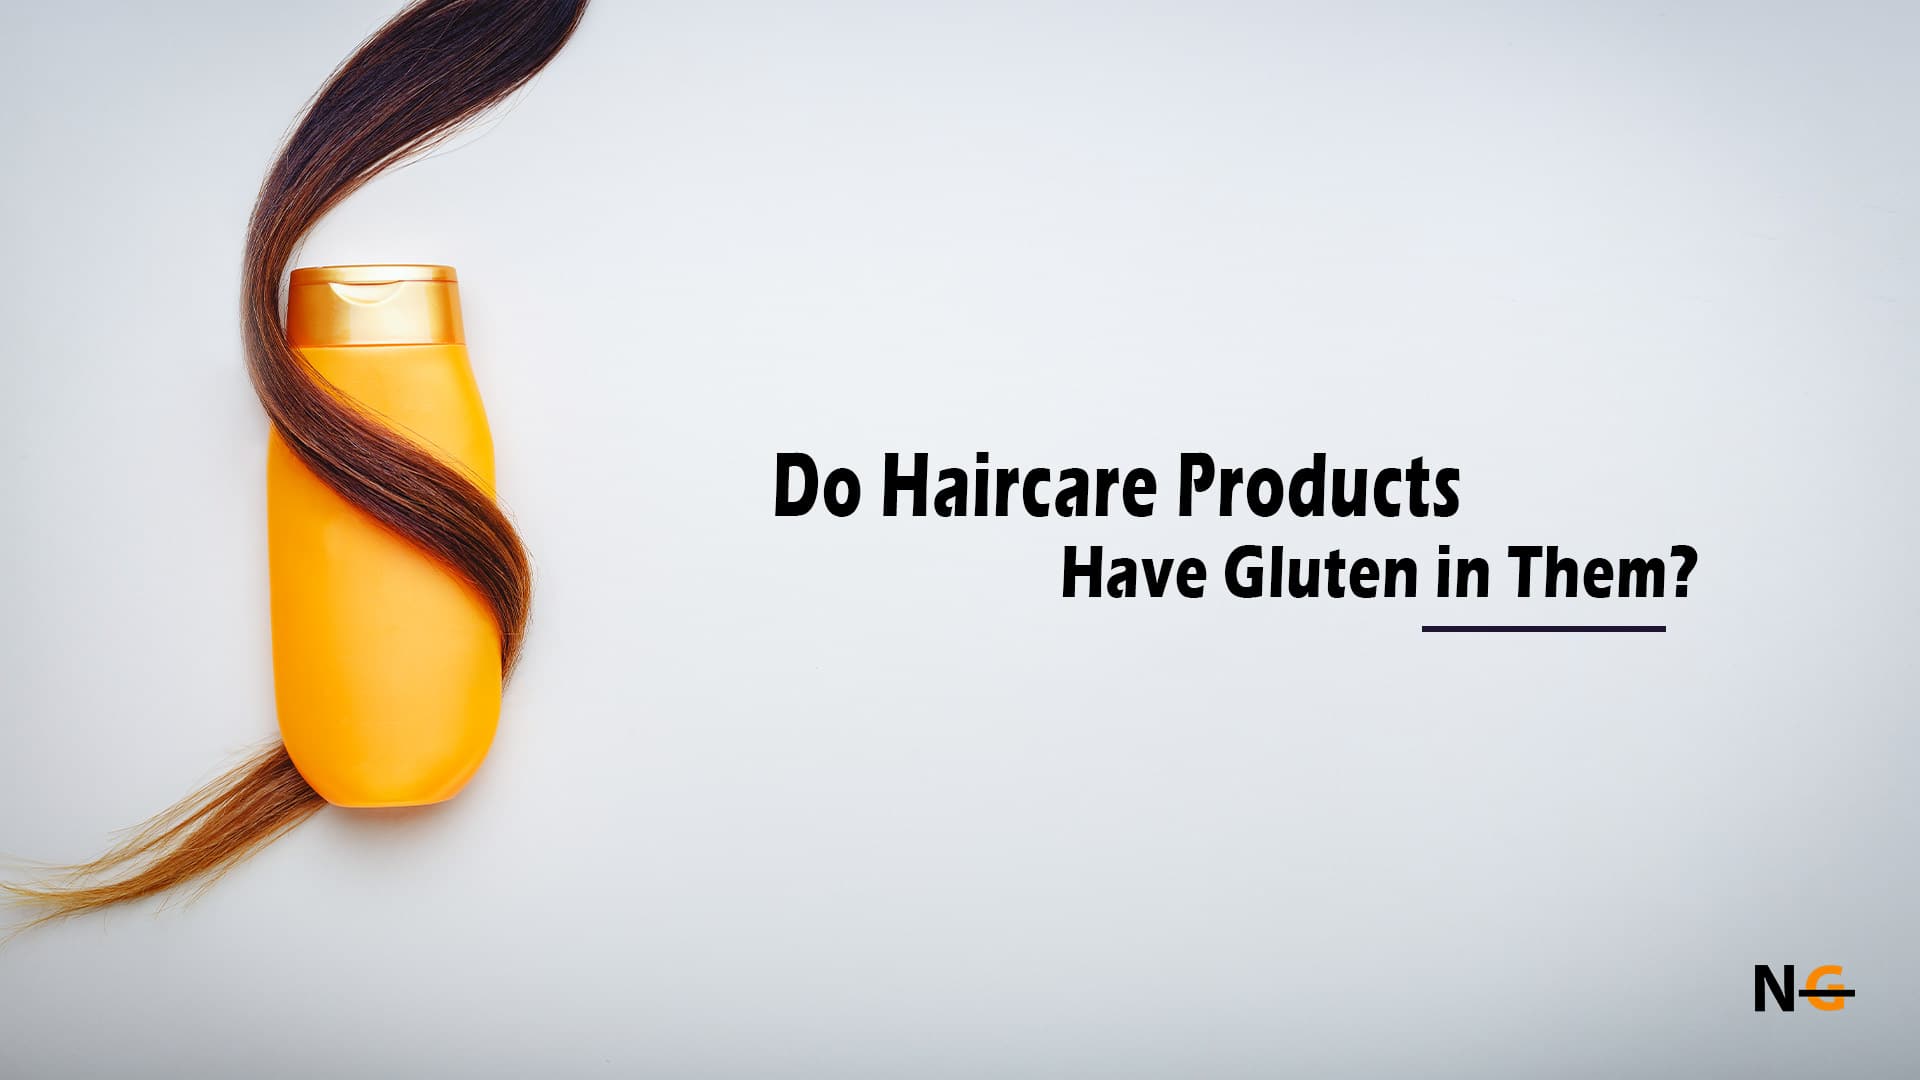 Do Haircare Products Have Gluten in Them